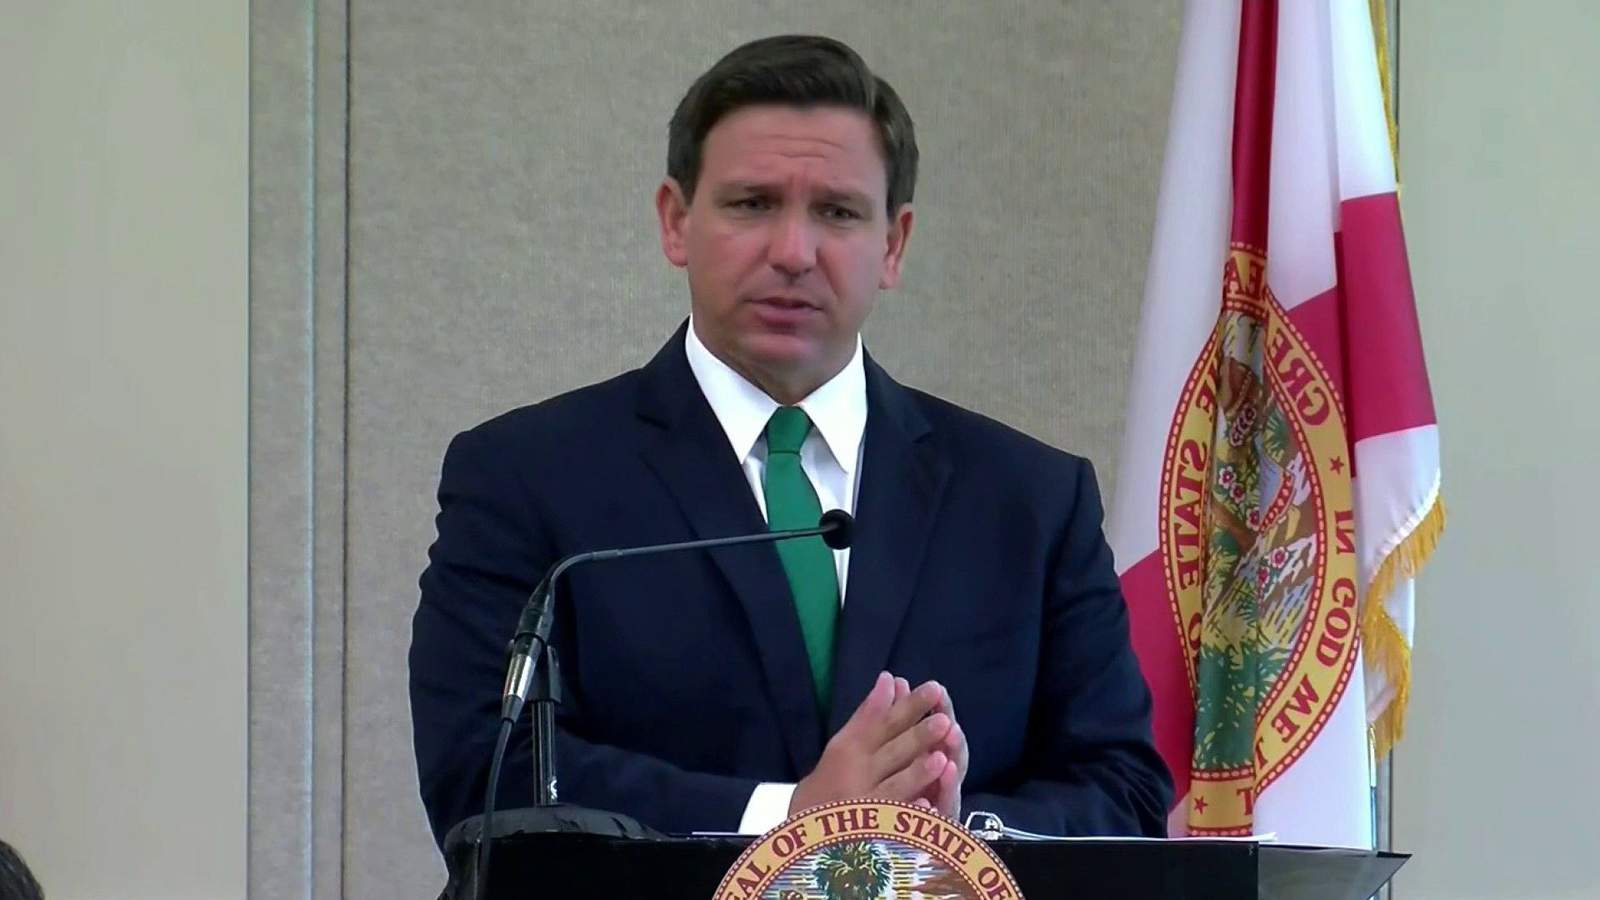 Gov. Ron DeSantis holds news conference in Panama City